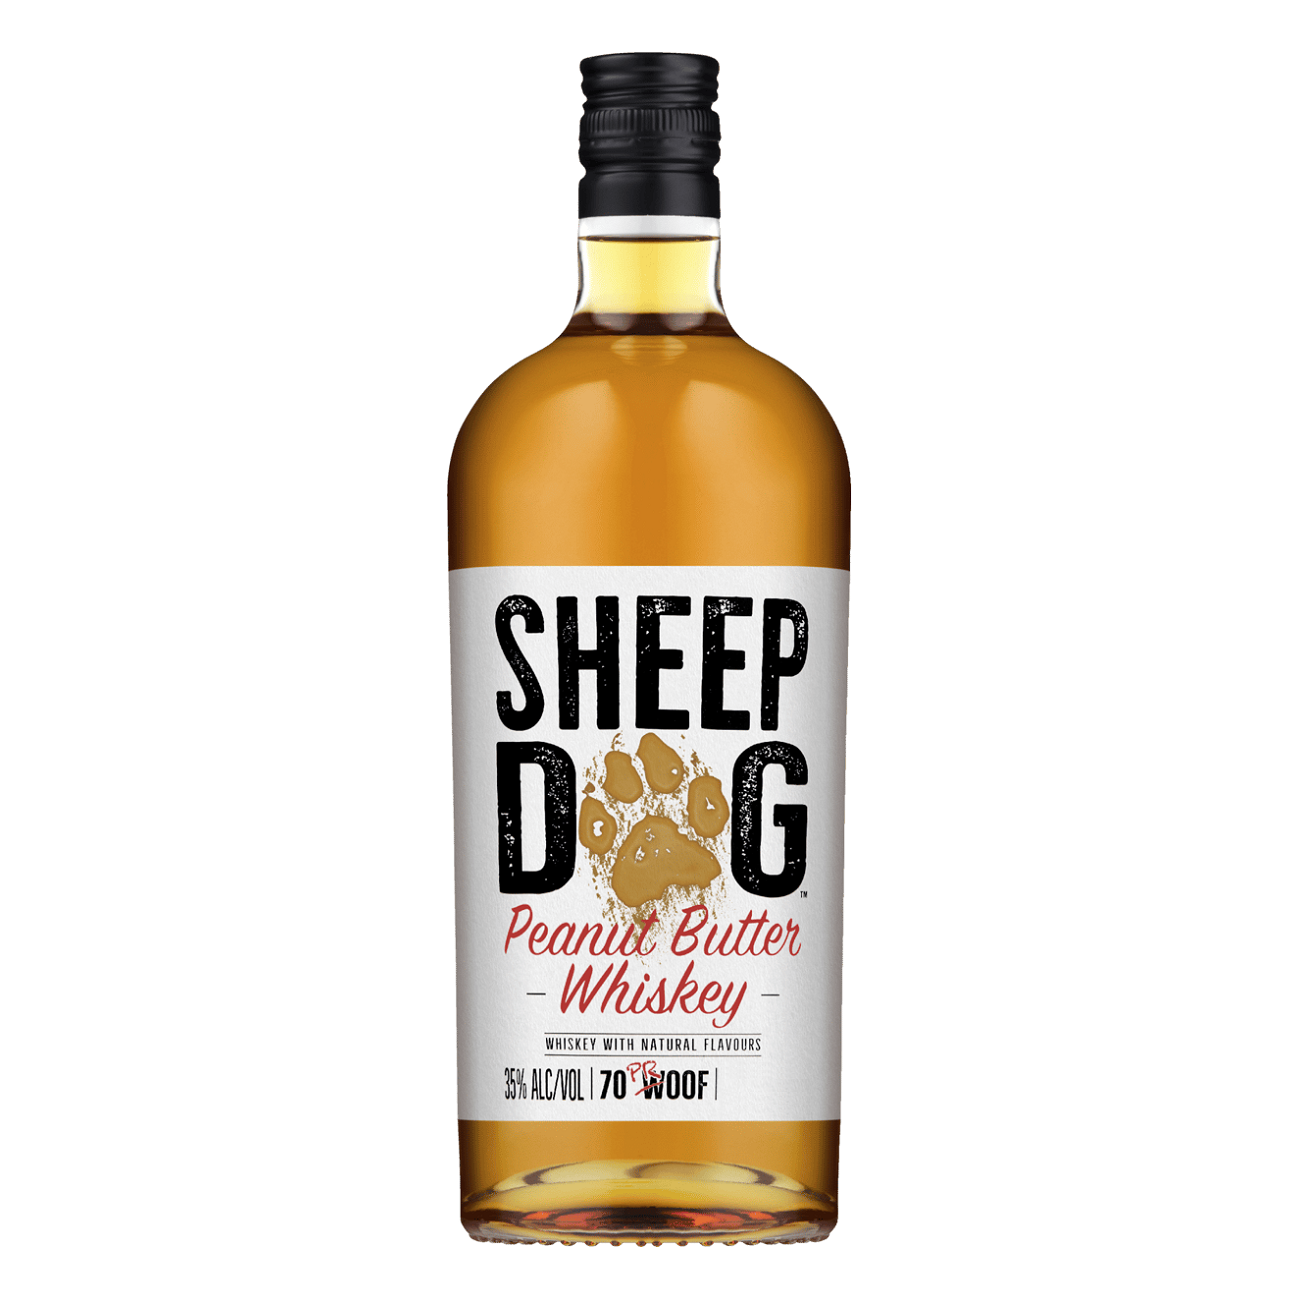 Sheep Dog Peanut Butter Whiskey 35% 1 Litre (New)